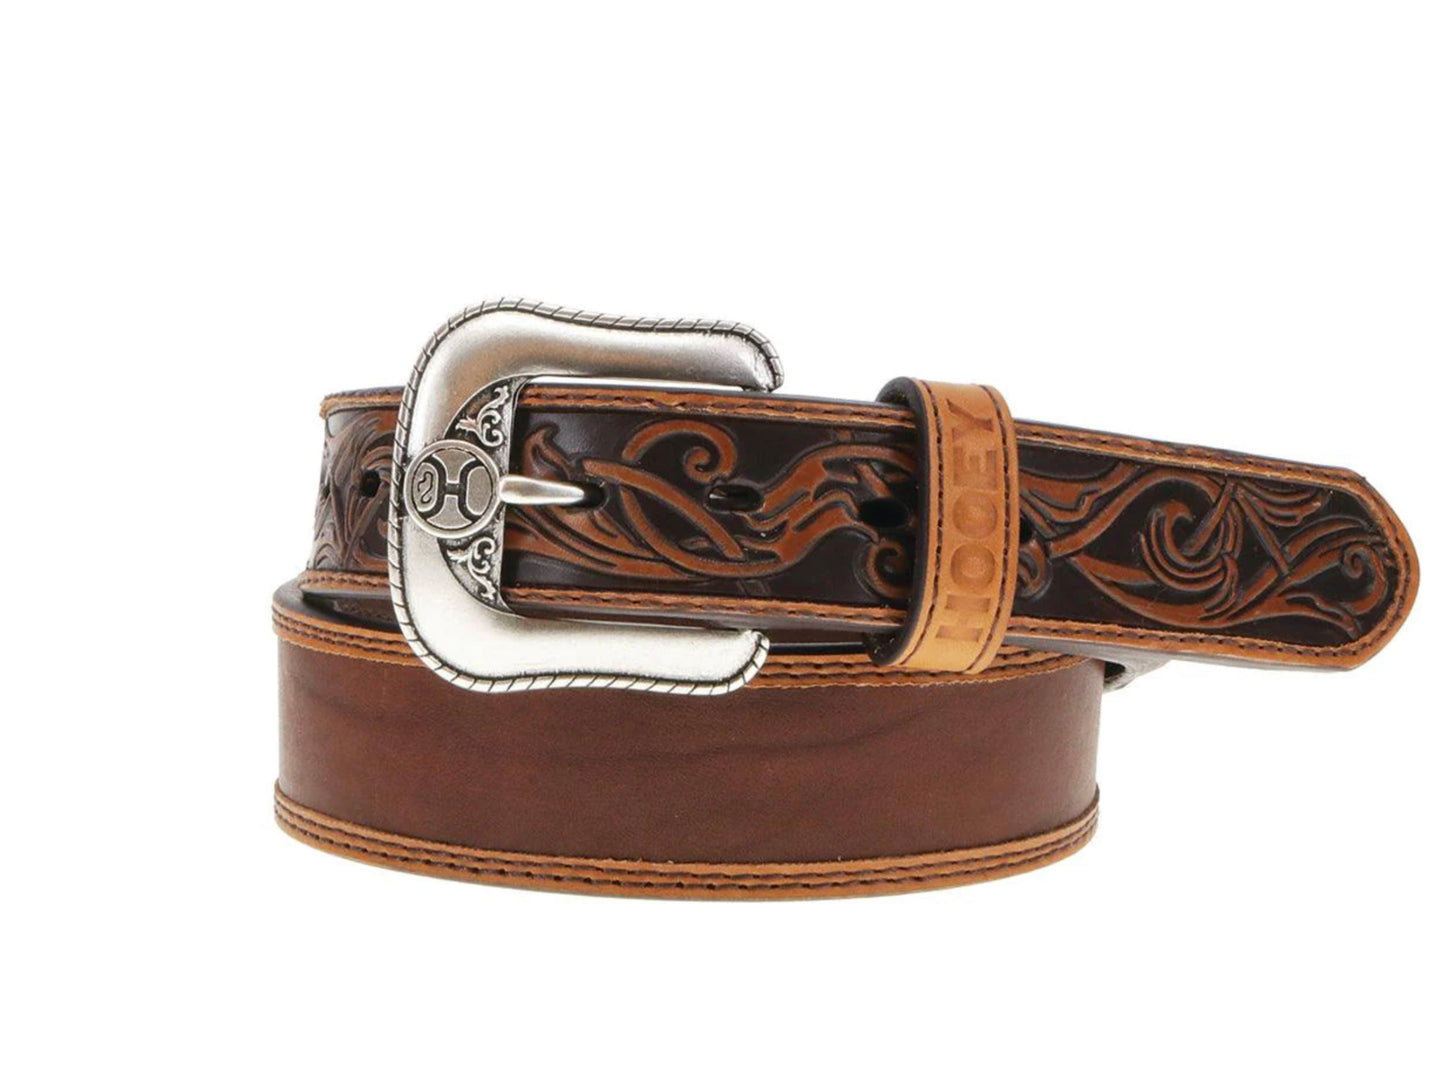 HOOEY “RANCHERO” 1.75”-1.5” TAPERED DISTRESSED BROWN LEATHER BELT WITH FILIGREE BILLETS AND NATURAL DOUBLE WELT ACCENT EDGE